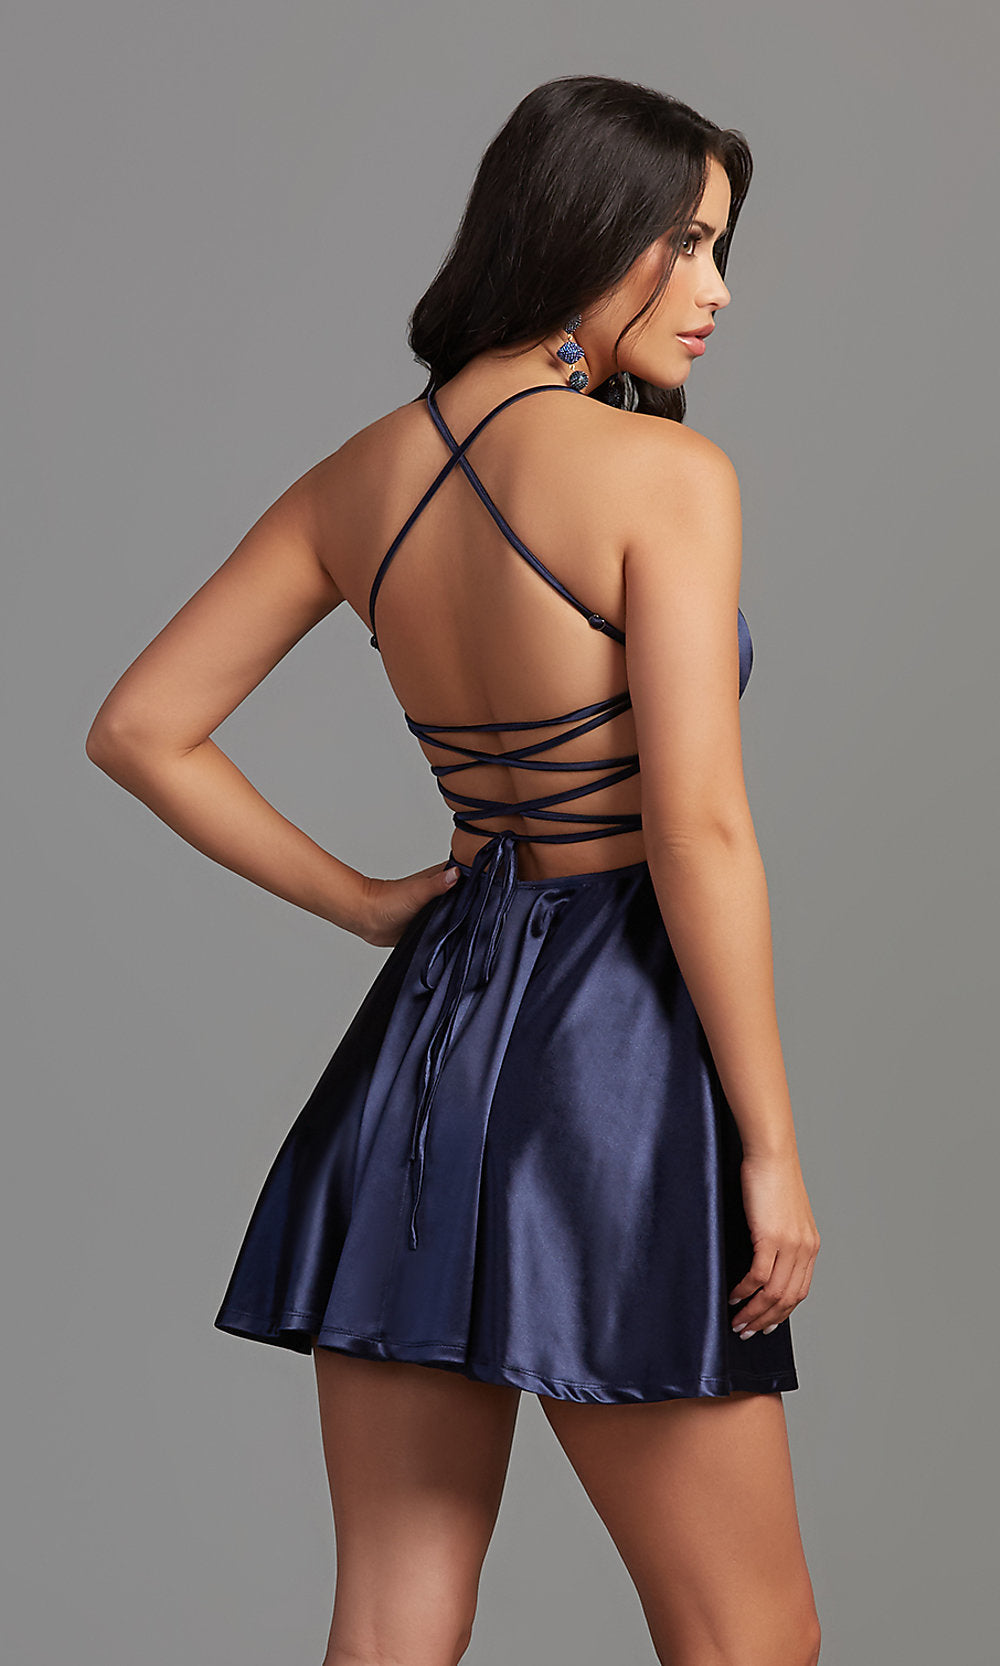  Corset-Back Short Homecoming Dress with Pockets